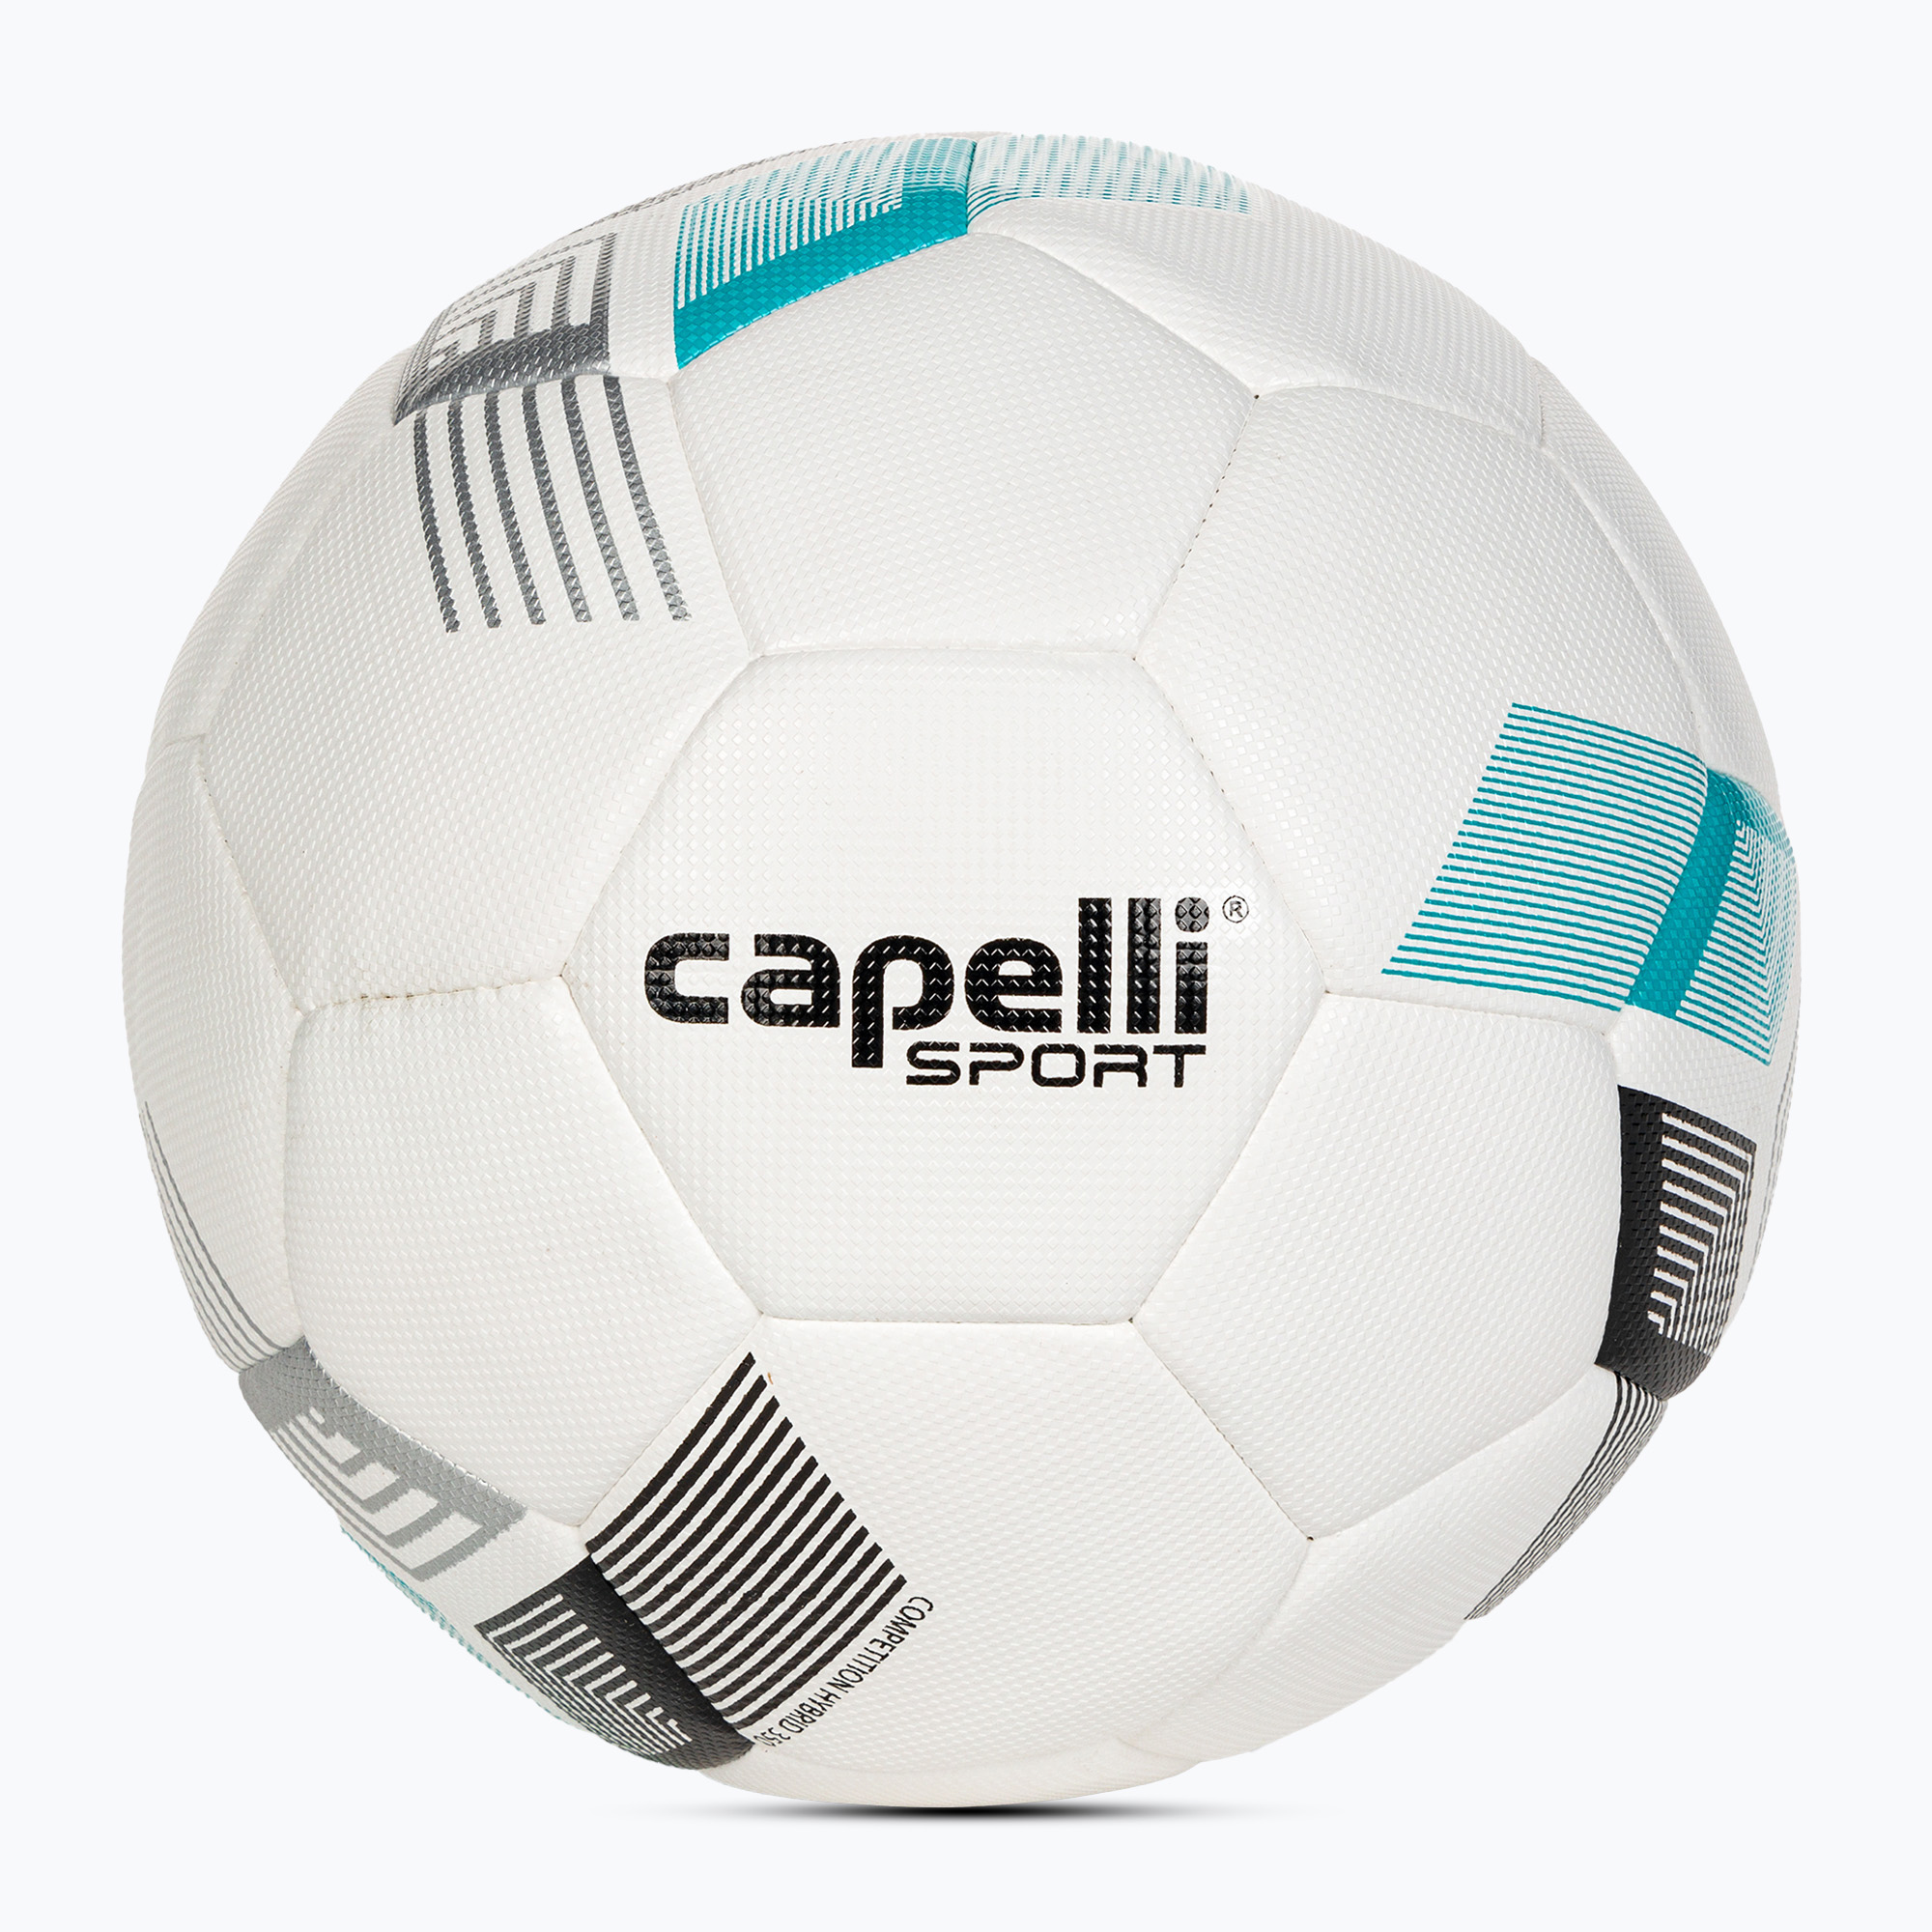 Capelli Tribeca Metro Competition Hybrid Football AGE-5882 размер 5